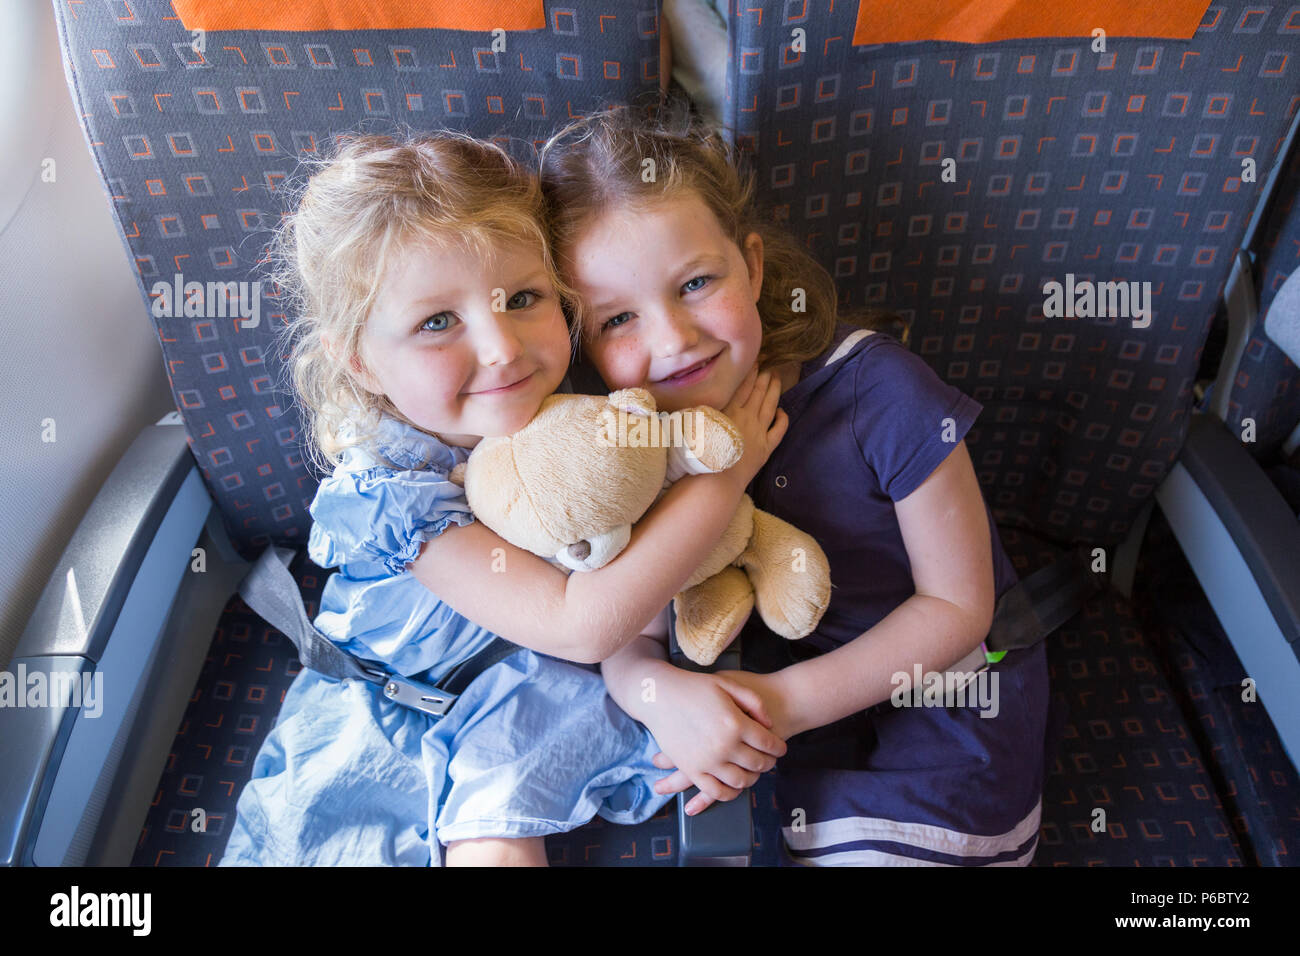 Child sibling sibling children / two sisters aged 3 and 5 going on holiday / vacation / flying on Airbus air plane / airplane / aeroplane flight (91) Stock Photo